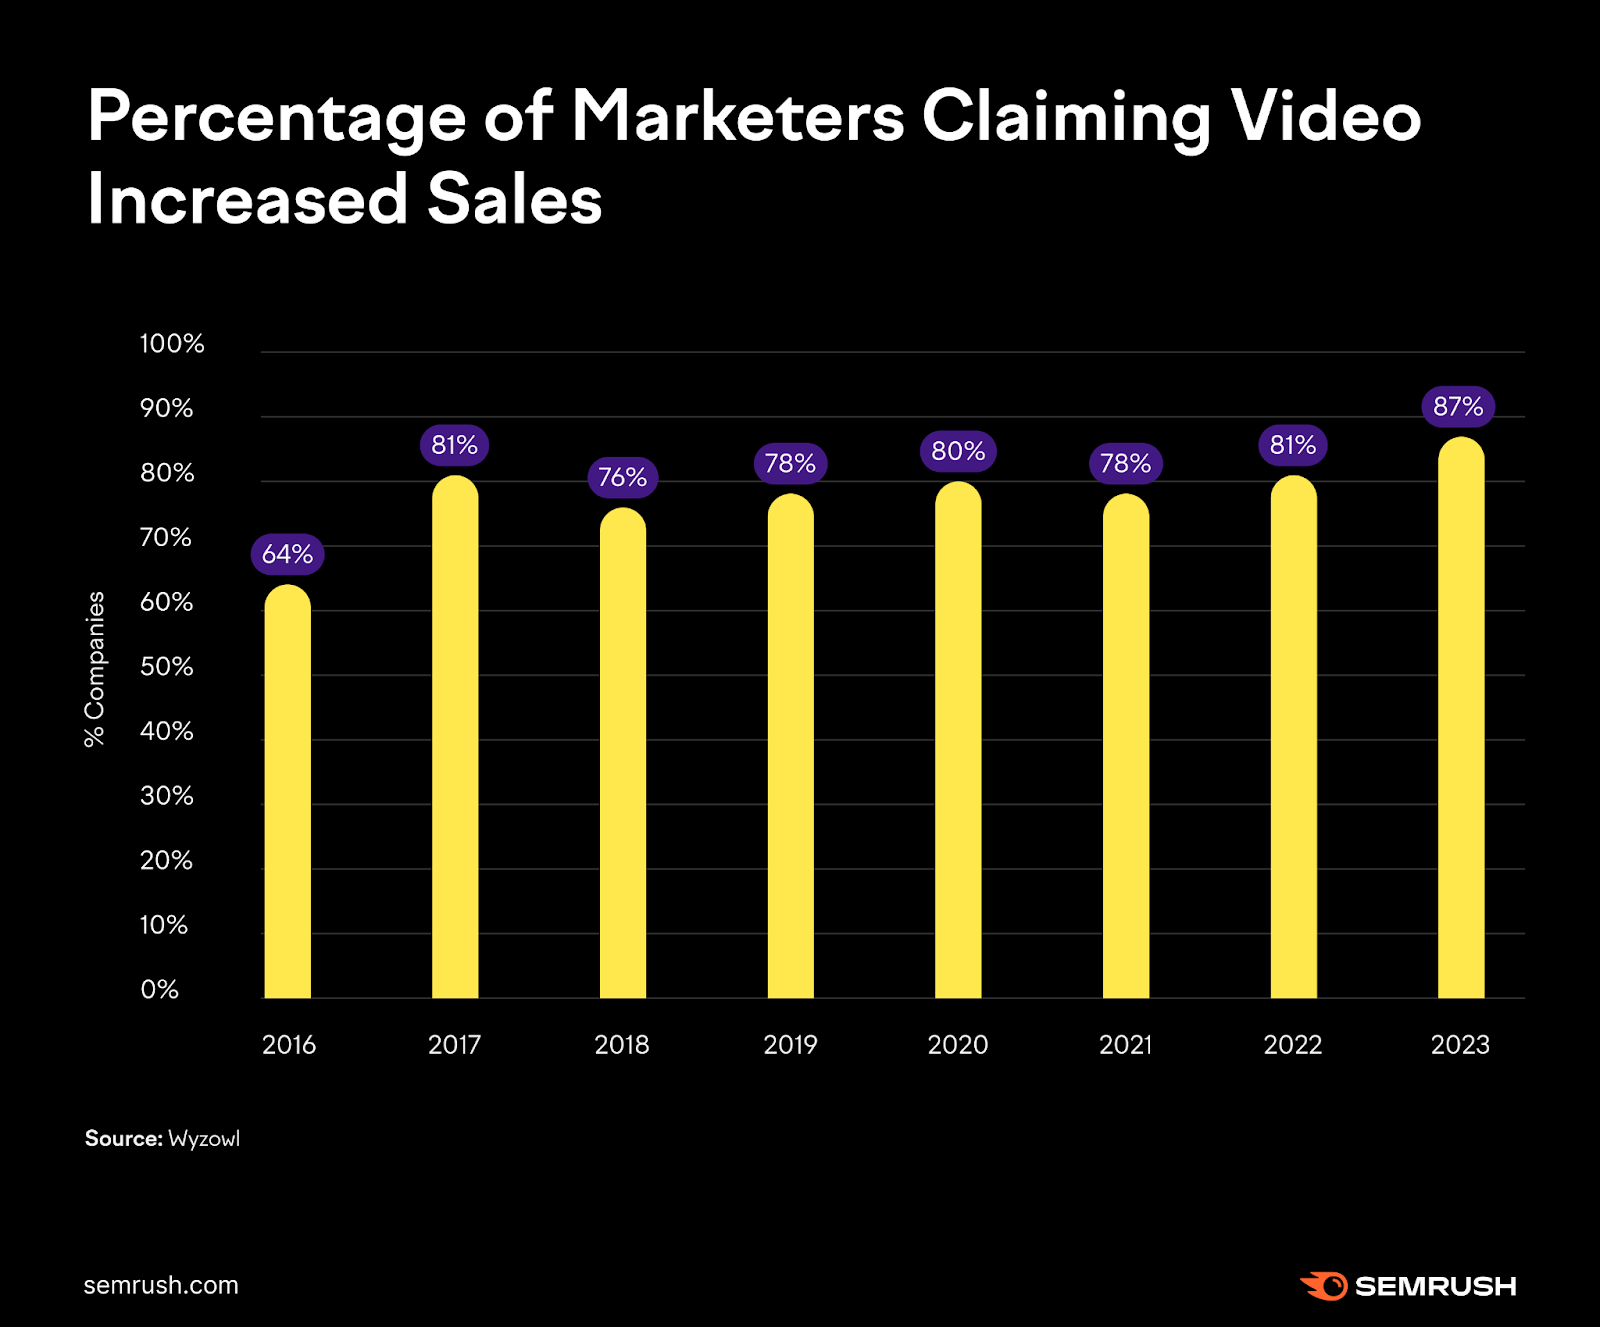 A graph showing the percentage of marketers claiming video increased sales